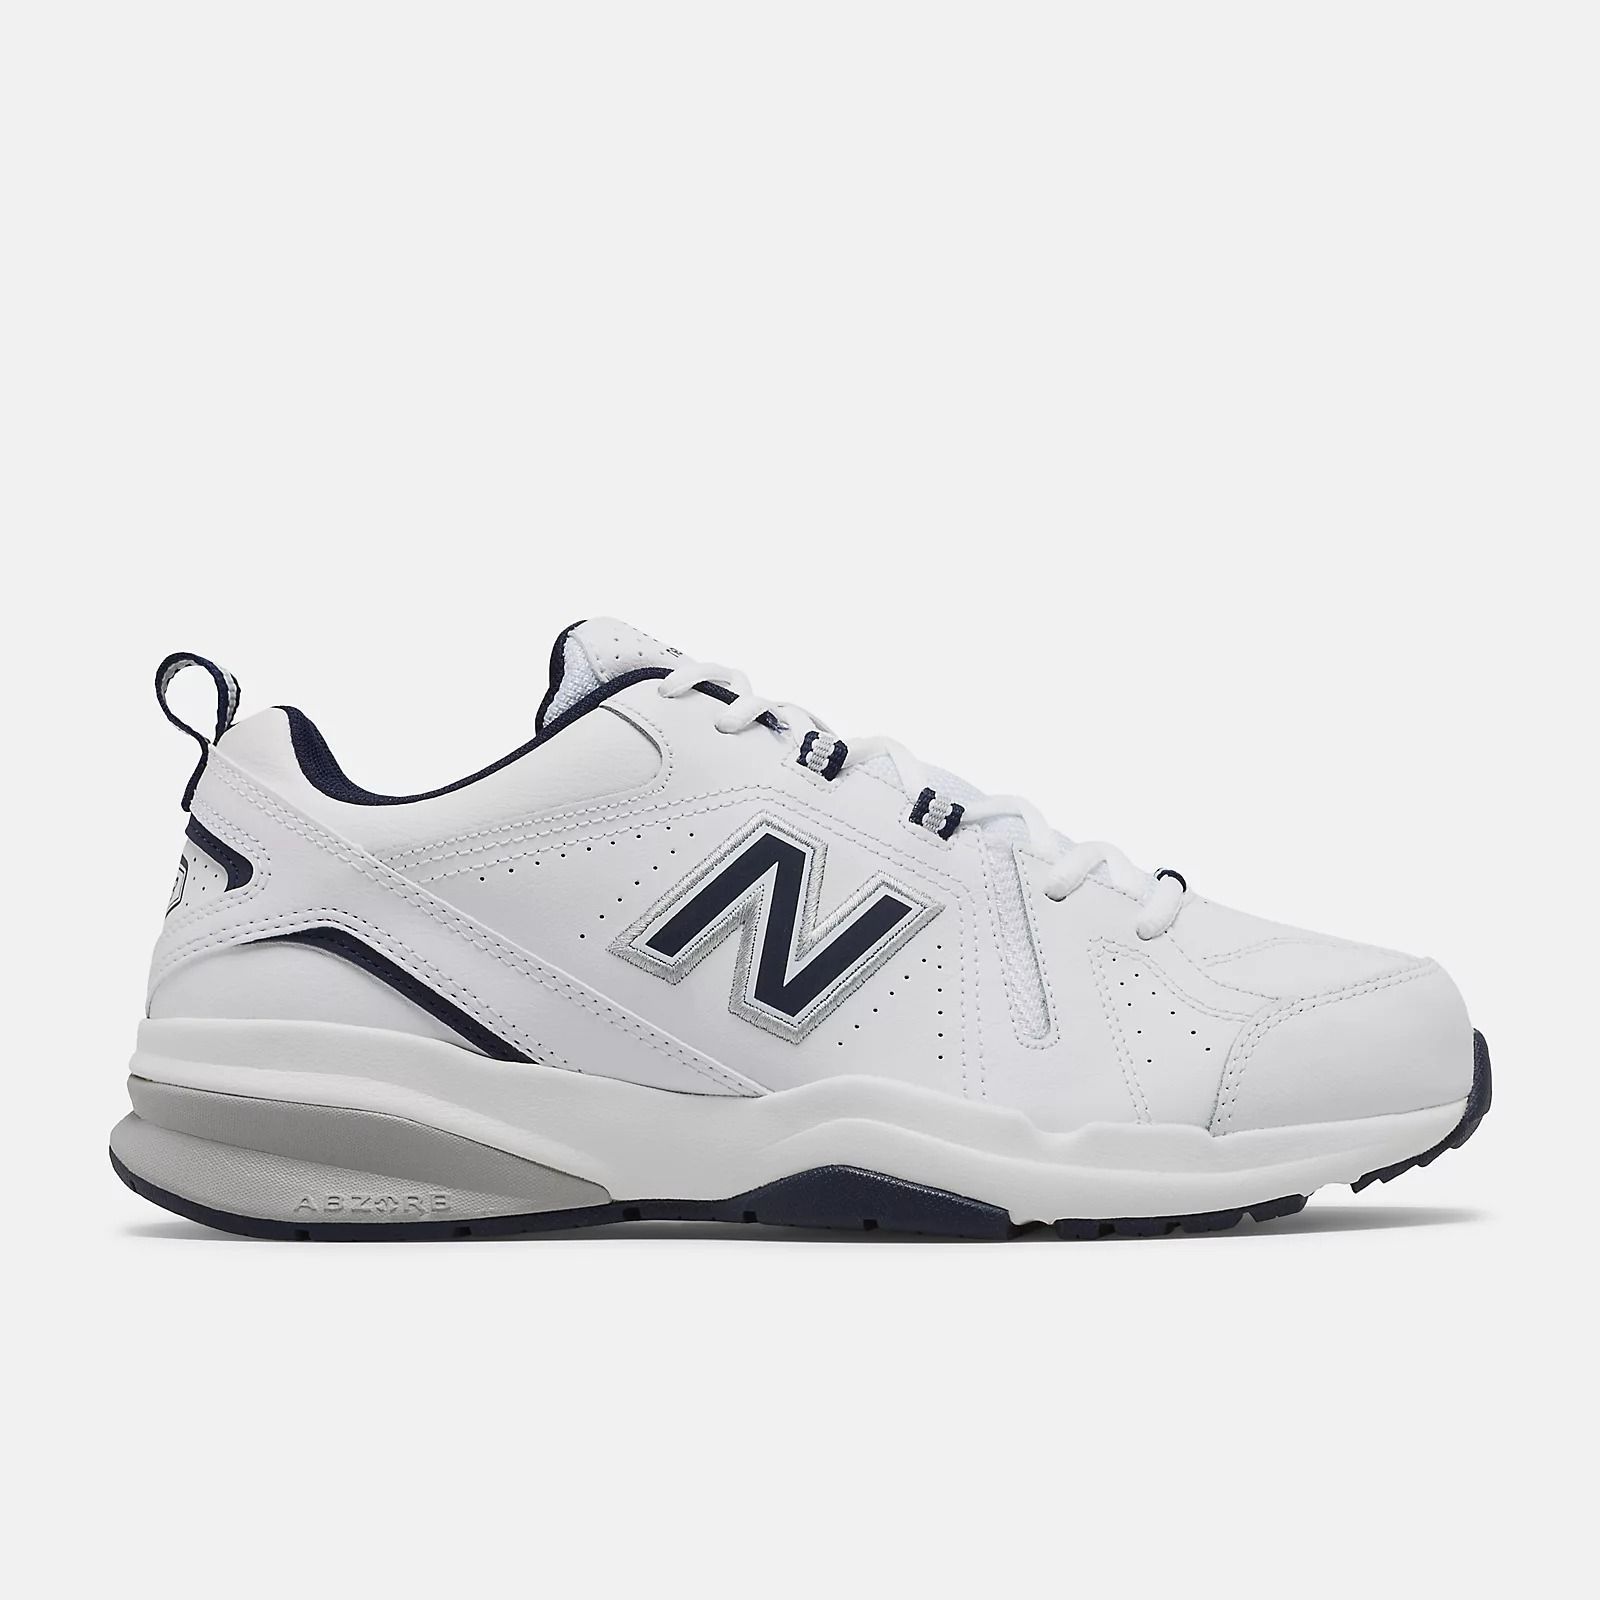 Nike M2K Tekno is queen of the top sneakers for women | Well+Good